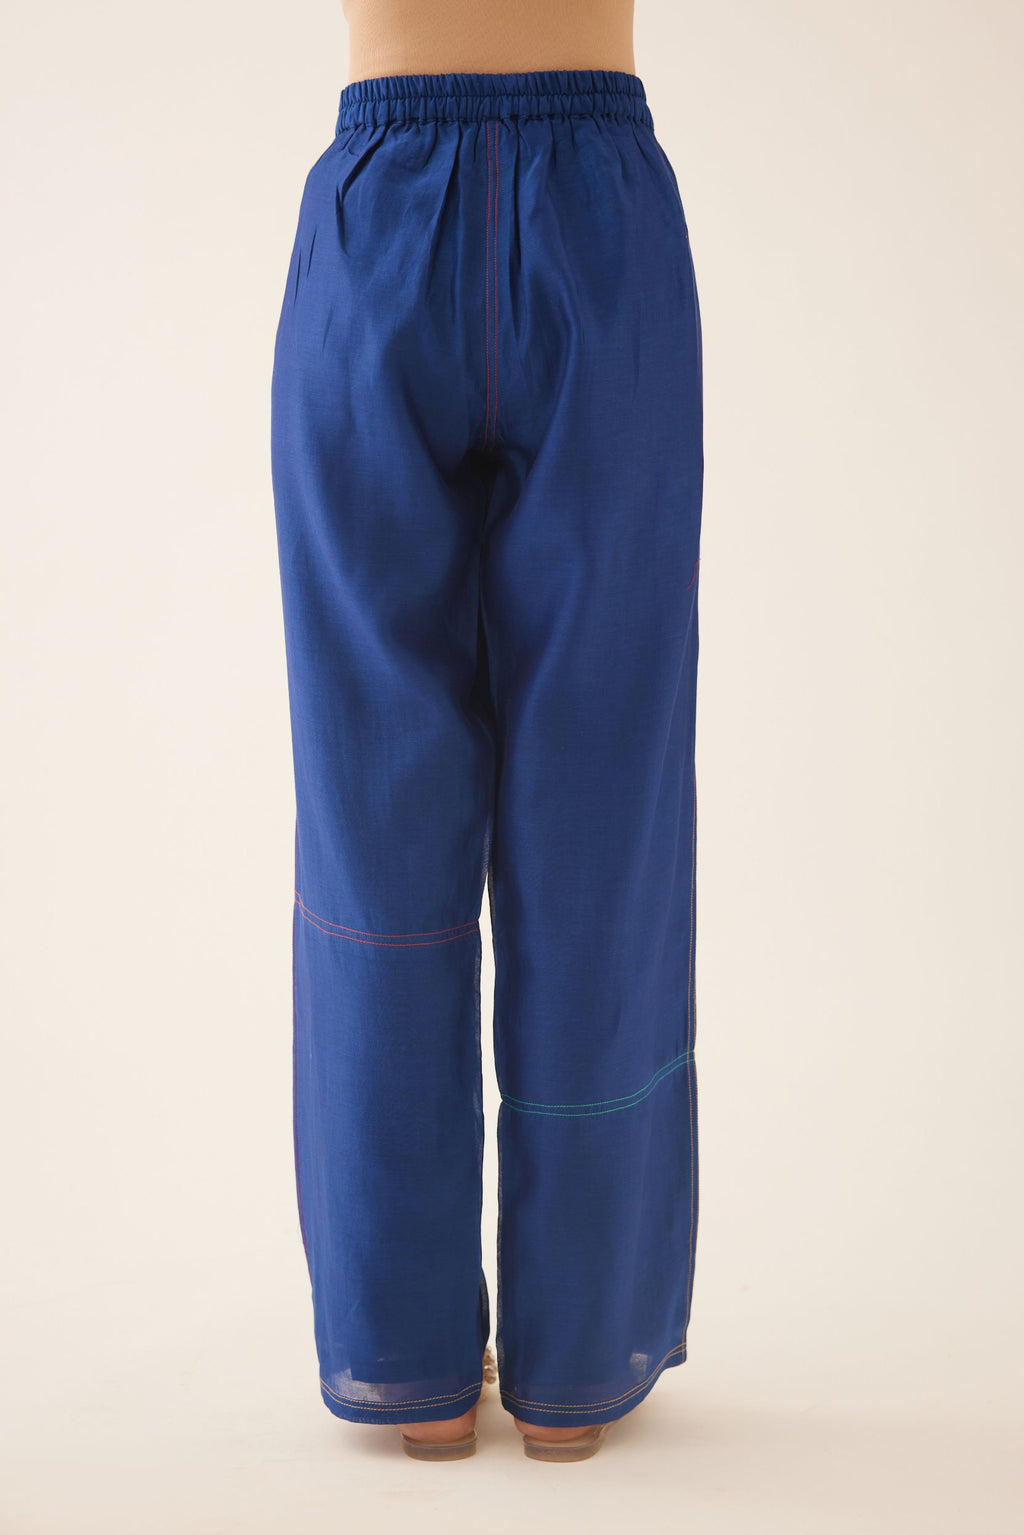 Blue silk chanderi straight pants, highlighted with multi colored thread stitch detail.